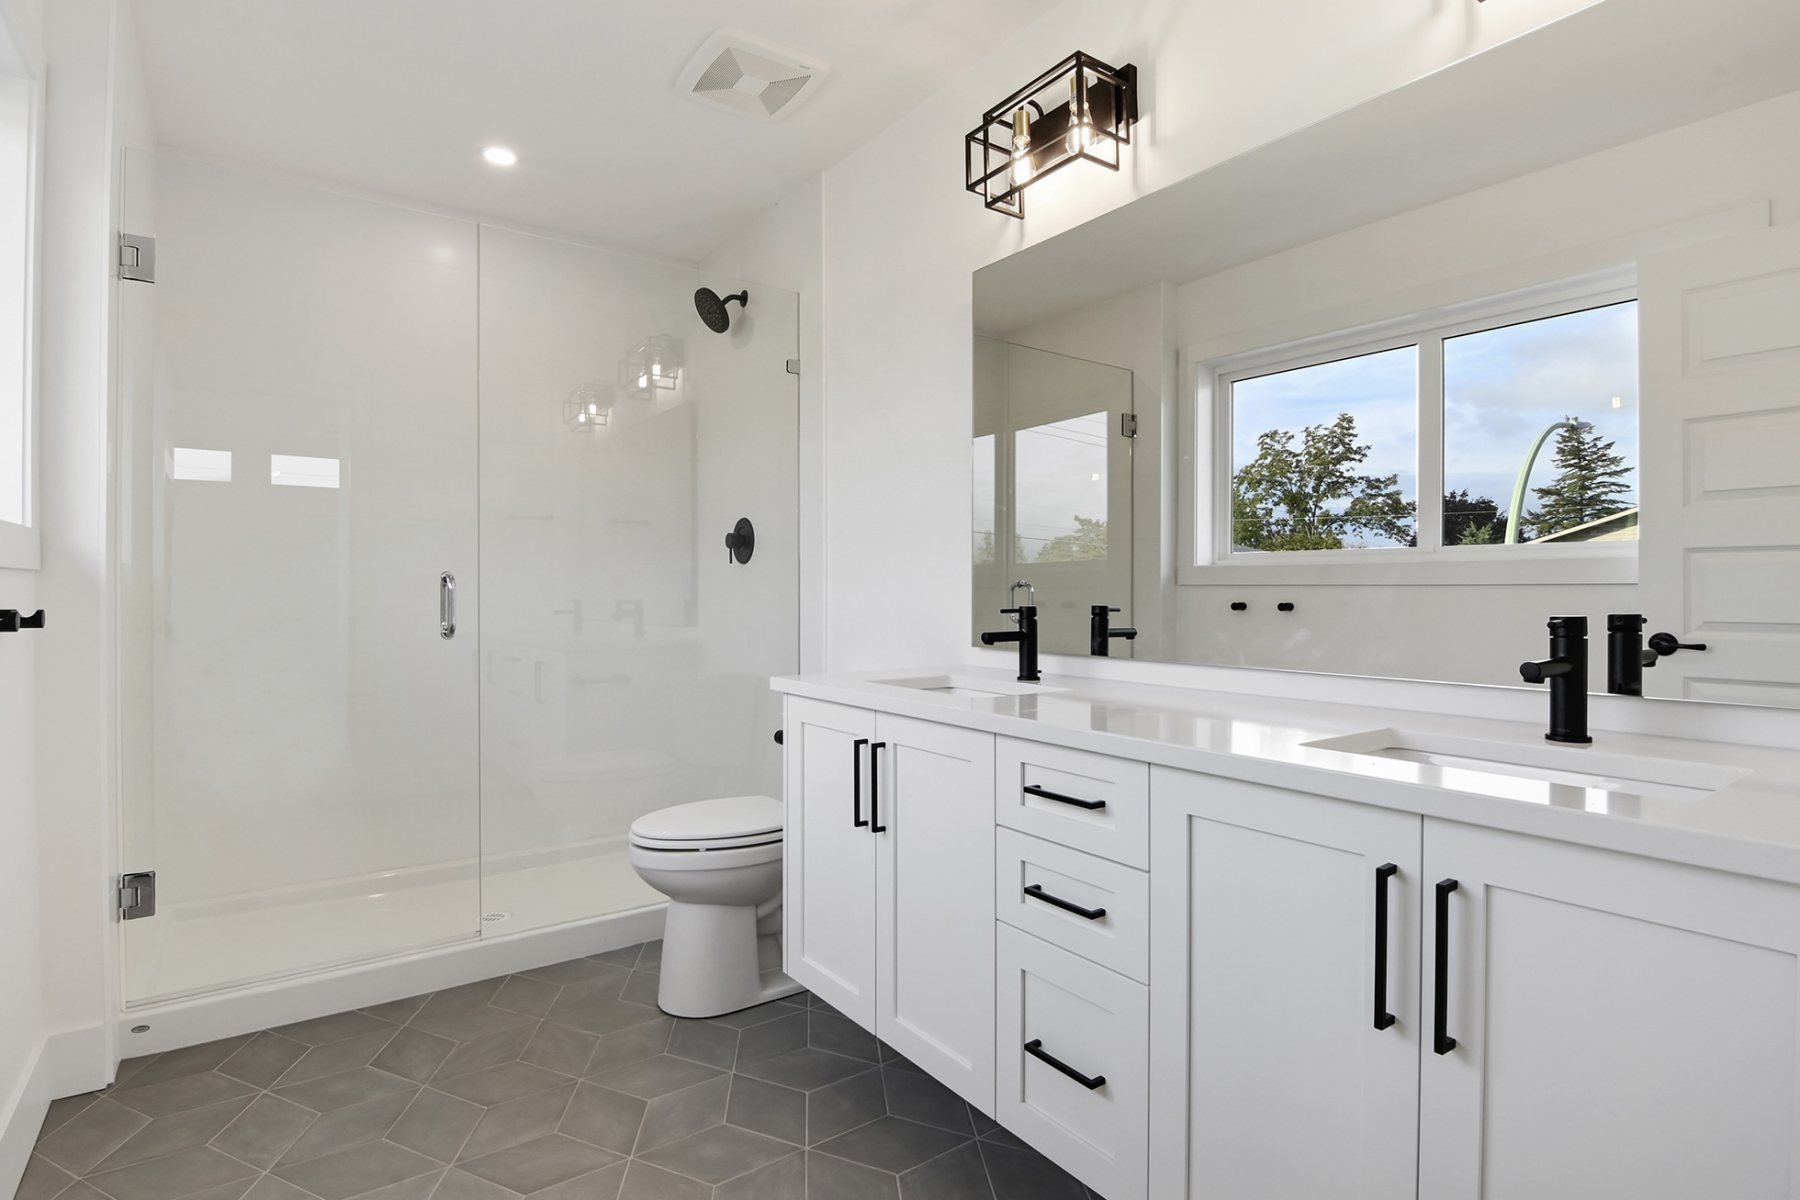 1_harmony_homes_patterson_ave_infill_projec_bath_room_gallery_image_17